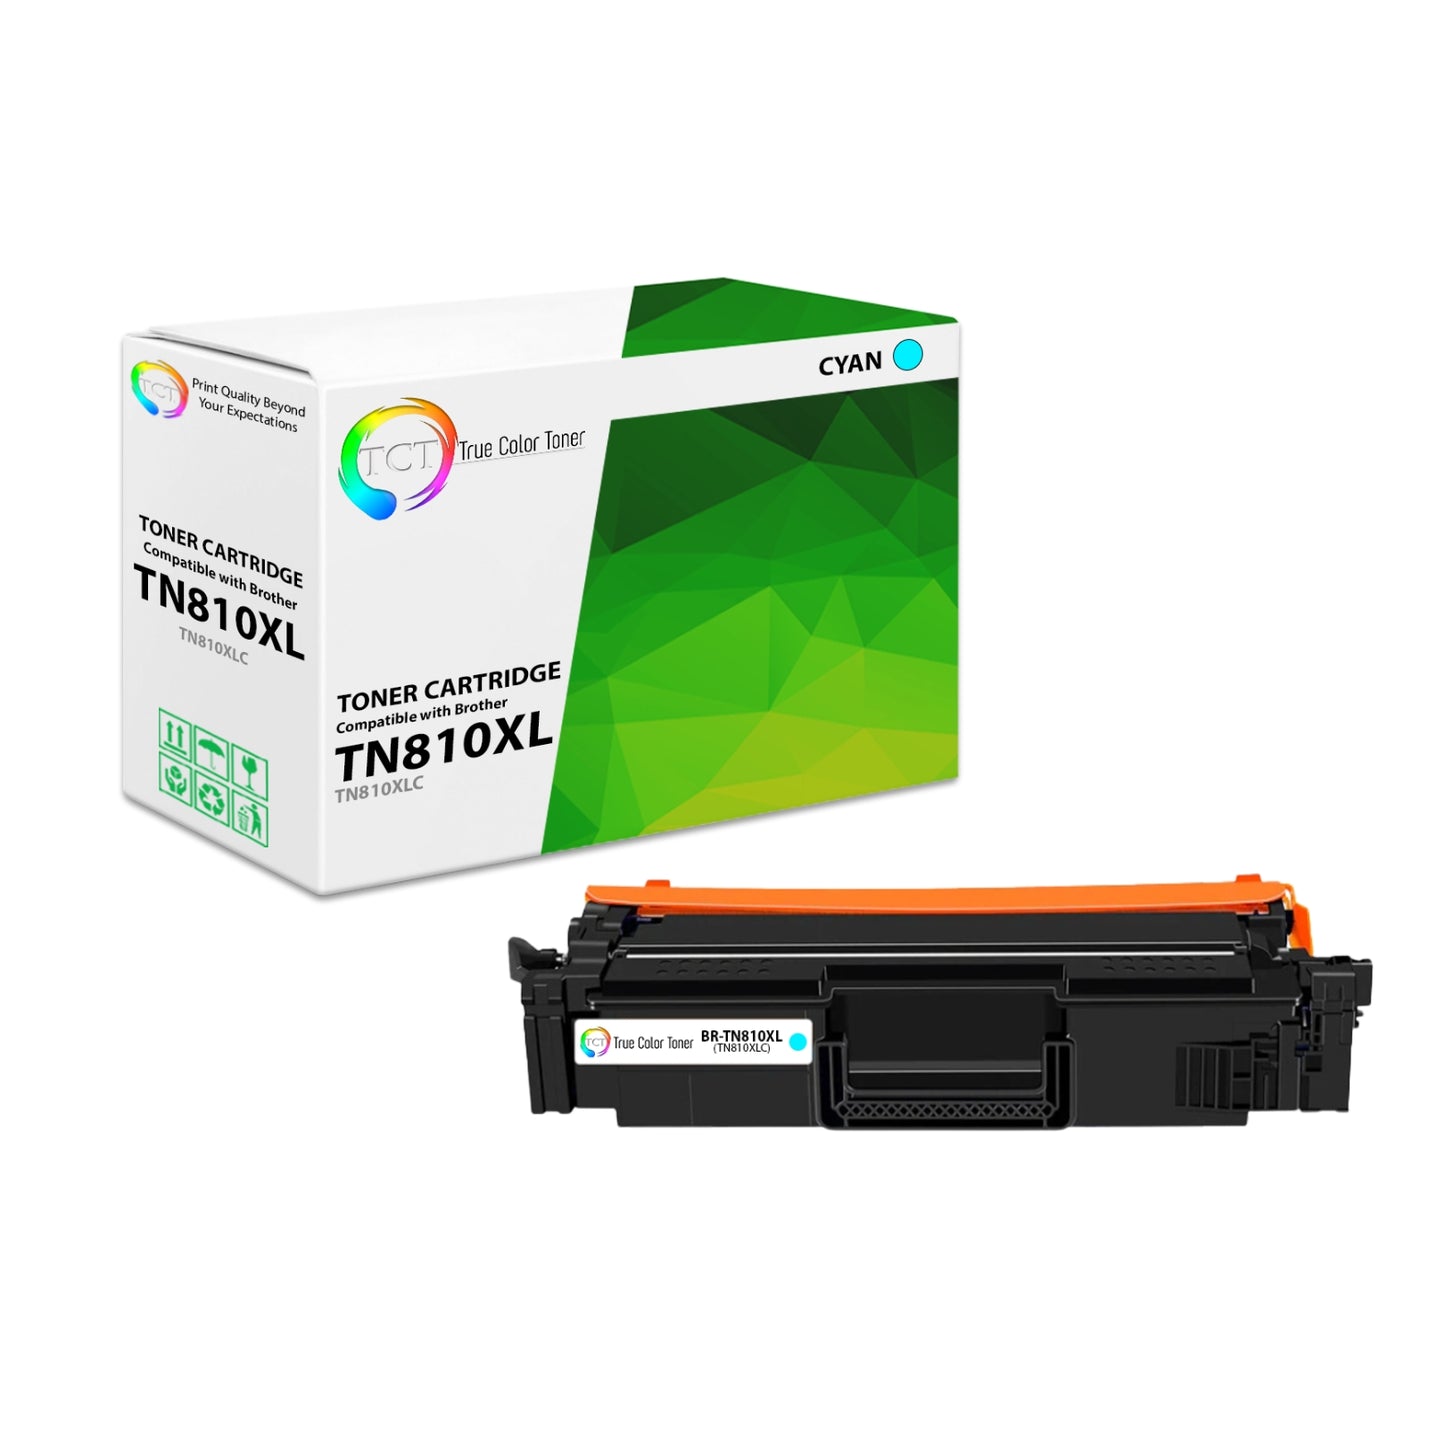 TCT Compatible Toner HY Cartridge Replacement for the Brother TN-810 Series - 1 Pack Cyan